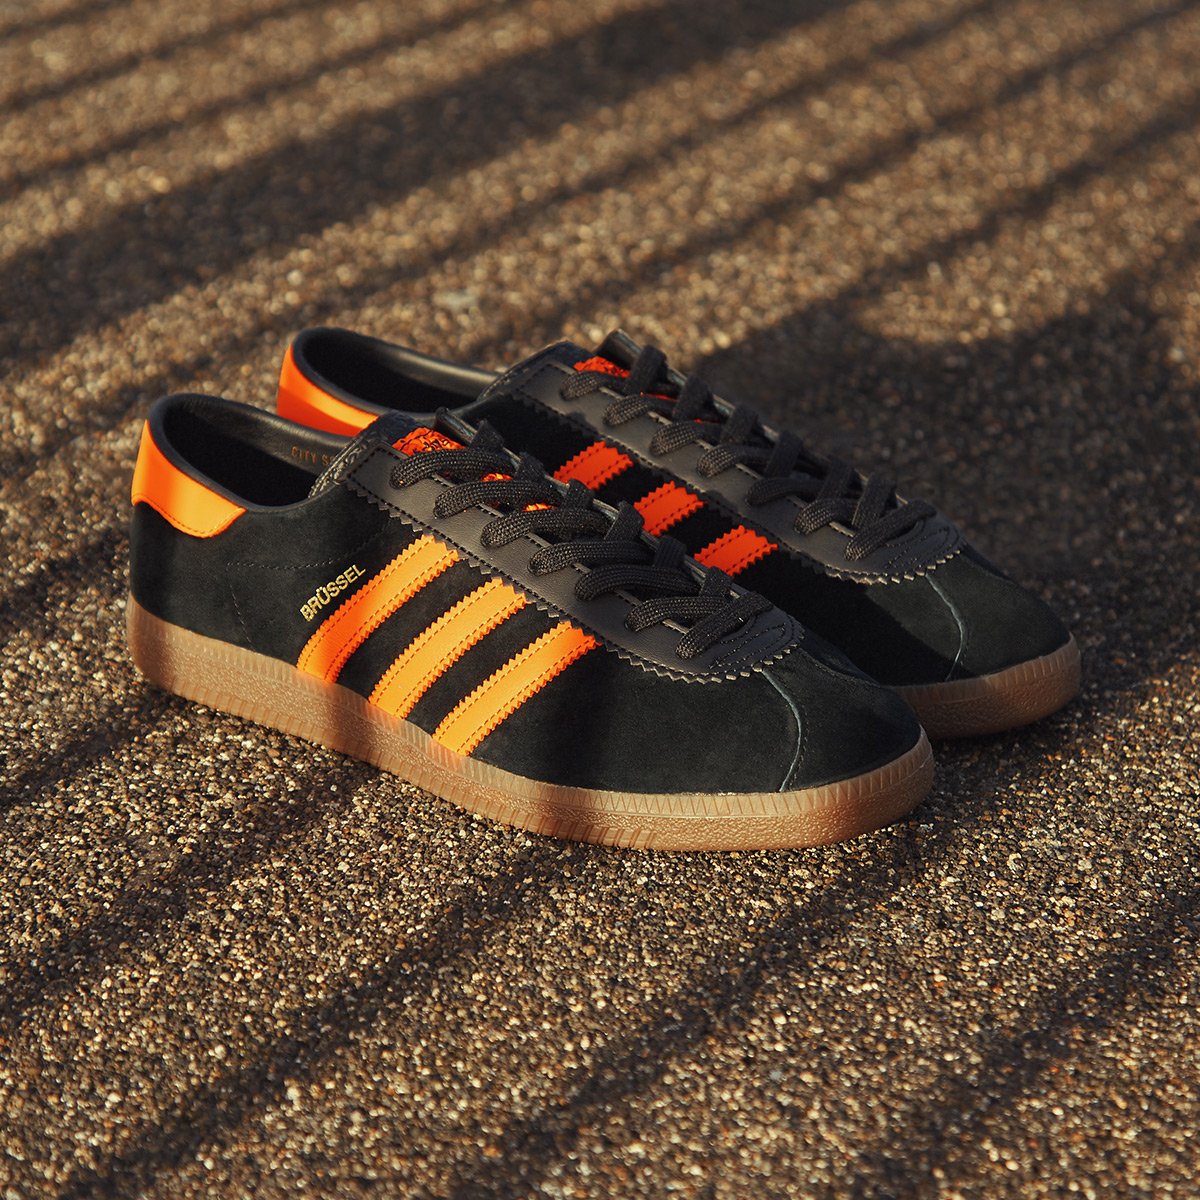 on adidas Brussels available in-store today (£89). https://t.co/X3XTEcFOCV https://t.co/oGwTgyFZRo" / Twitter